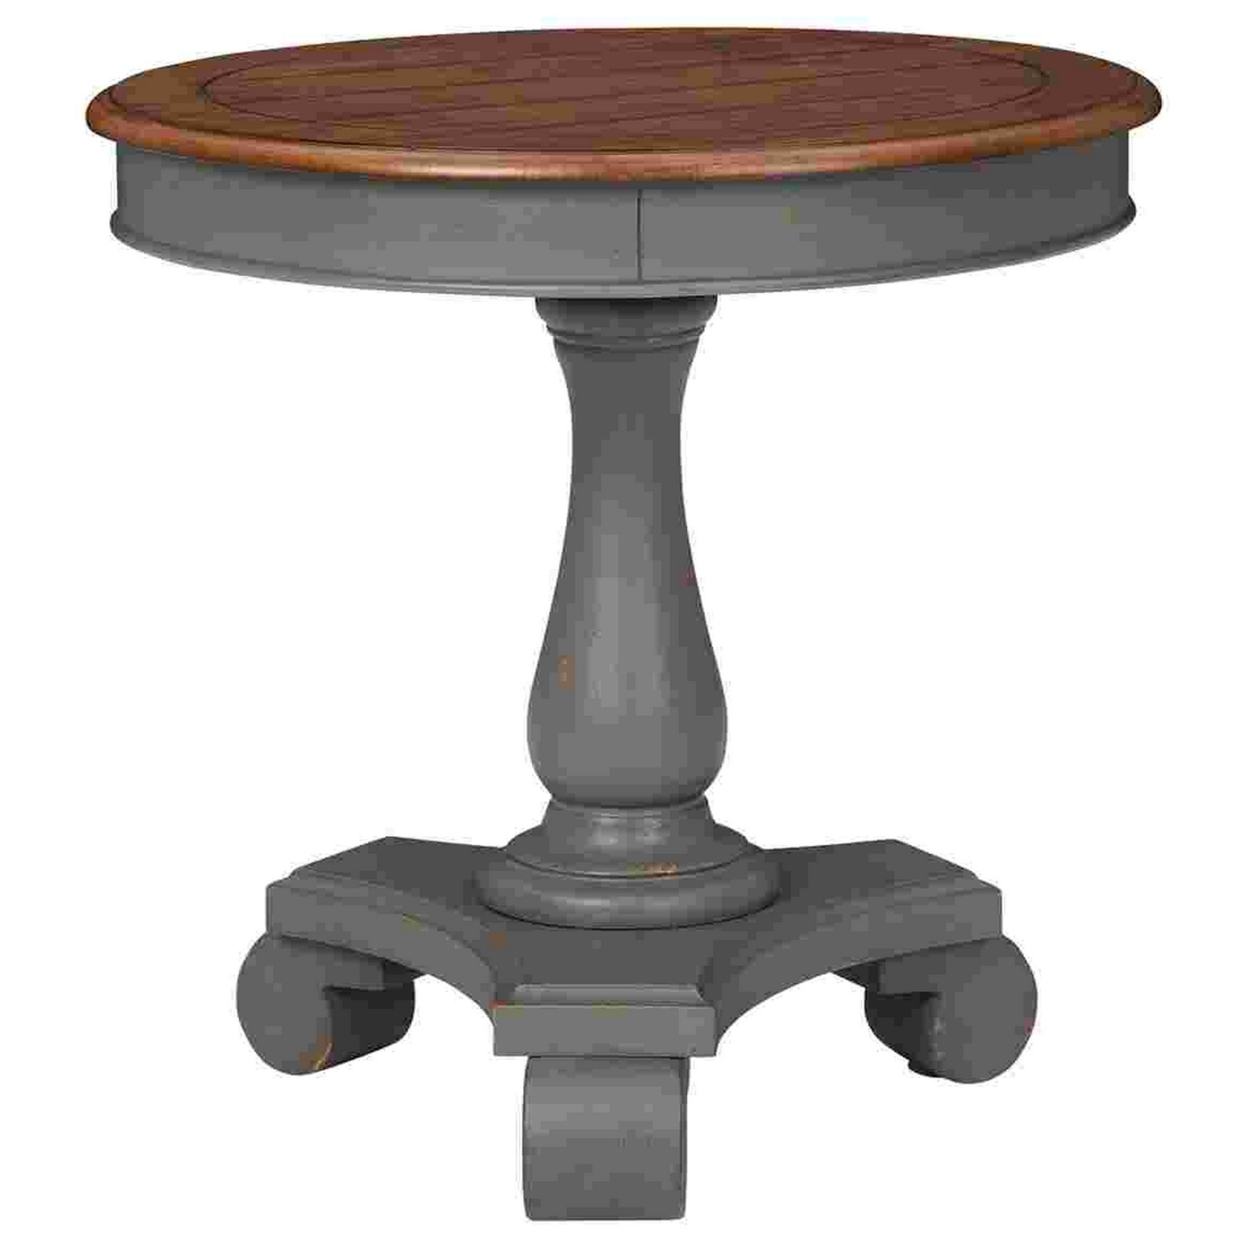 Wooden Accent Table With Round Tabletop, Gray And Brown- Saltoro Sherpi